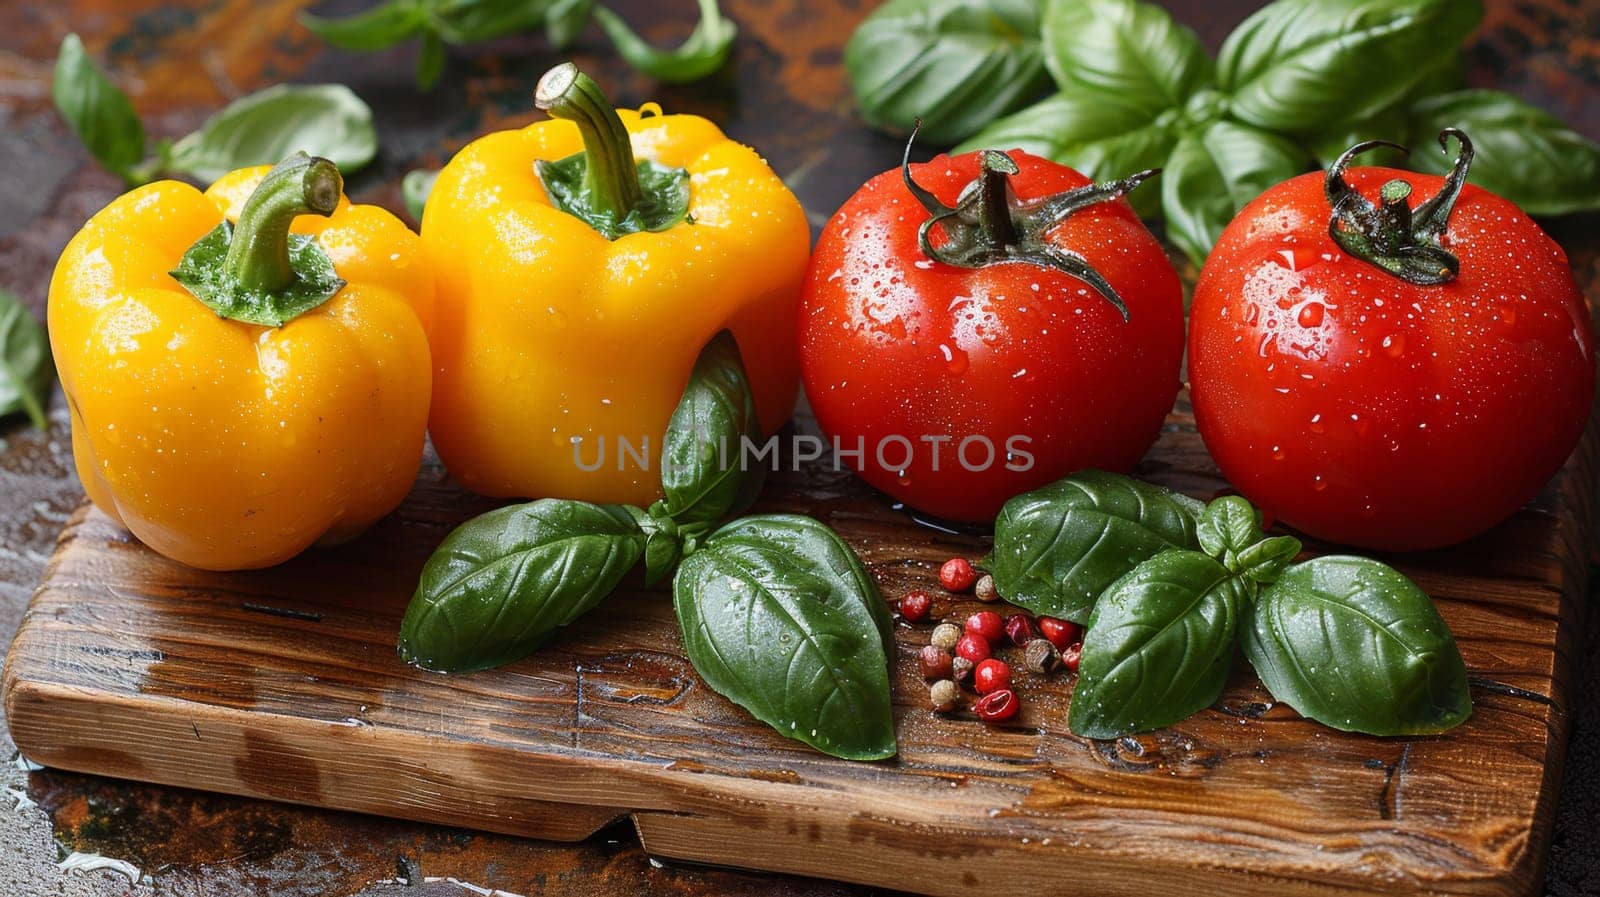 Three peppers are sitting on a cutting board with basil leaves, AI by starush